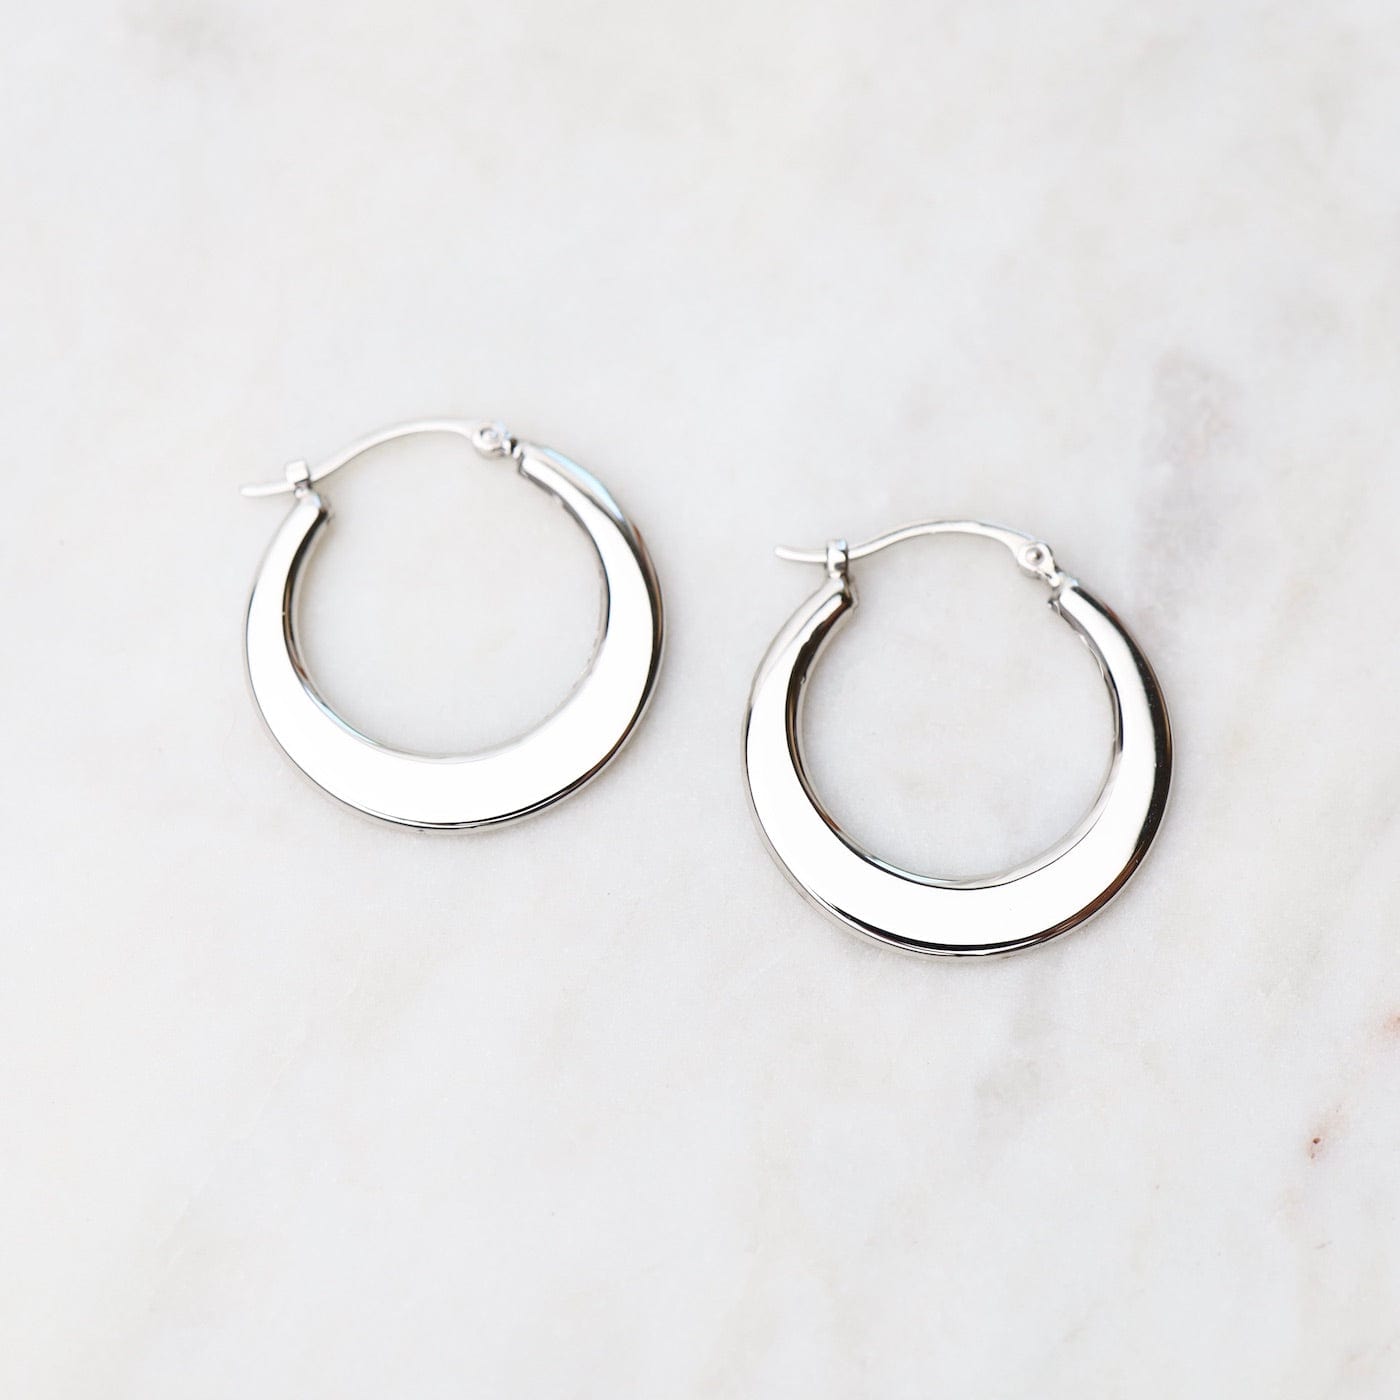 EAR-14K 14k White Gold Small Flat Crescent Hoops